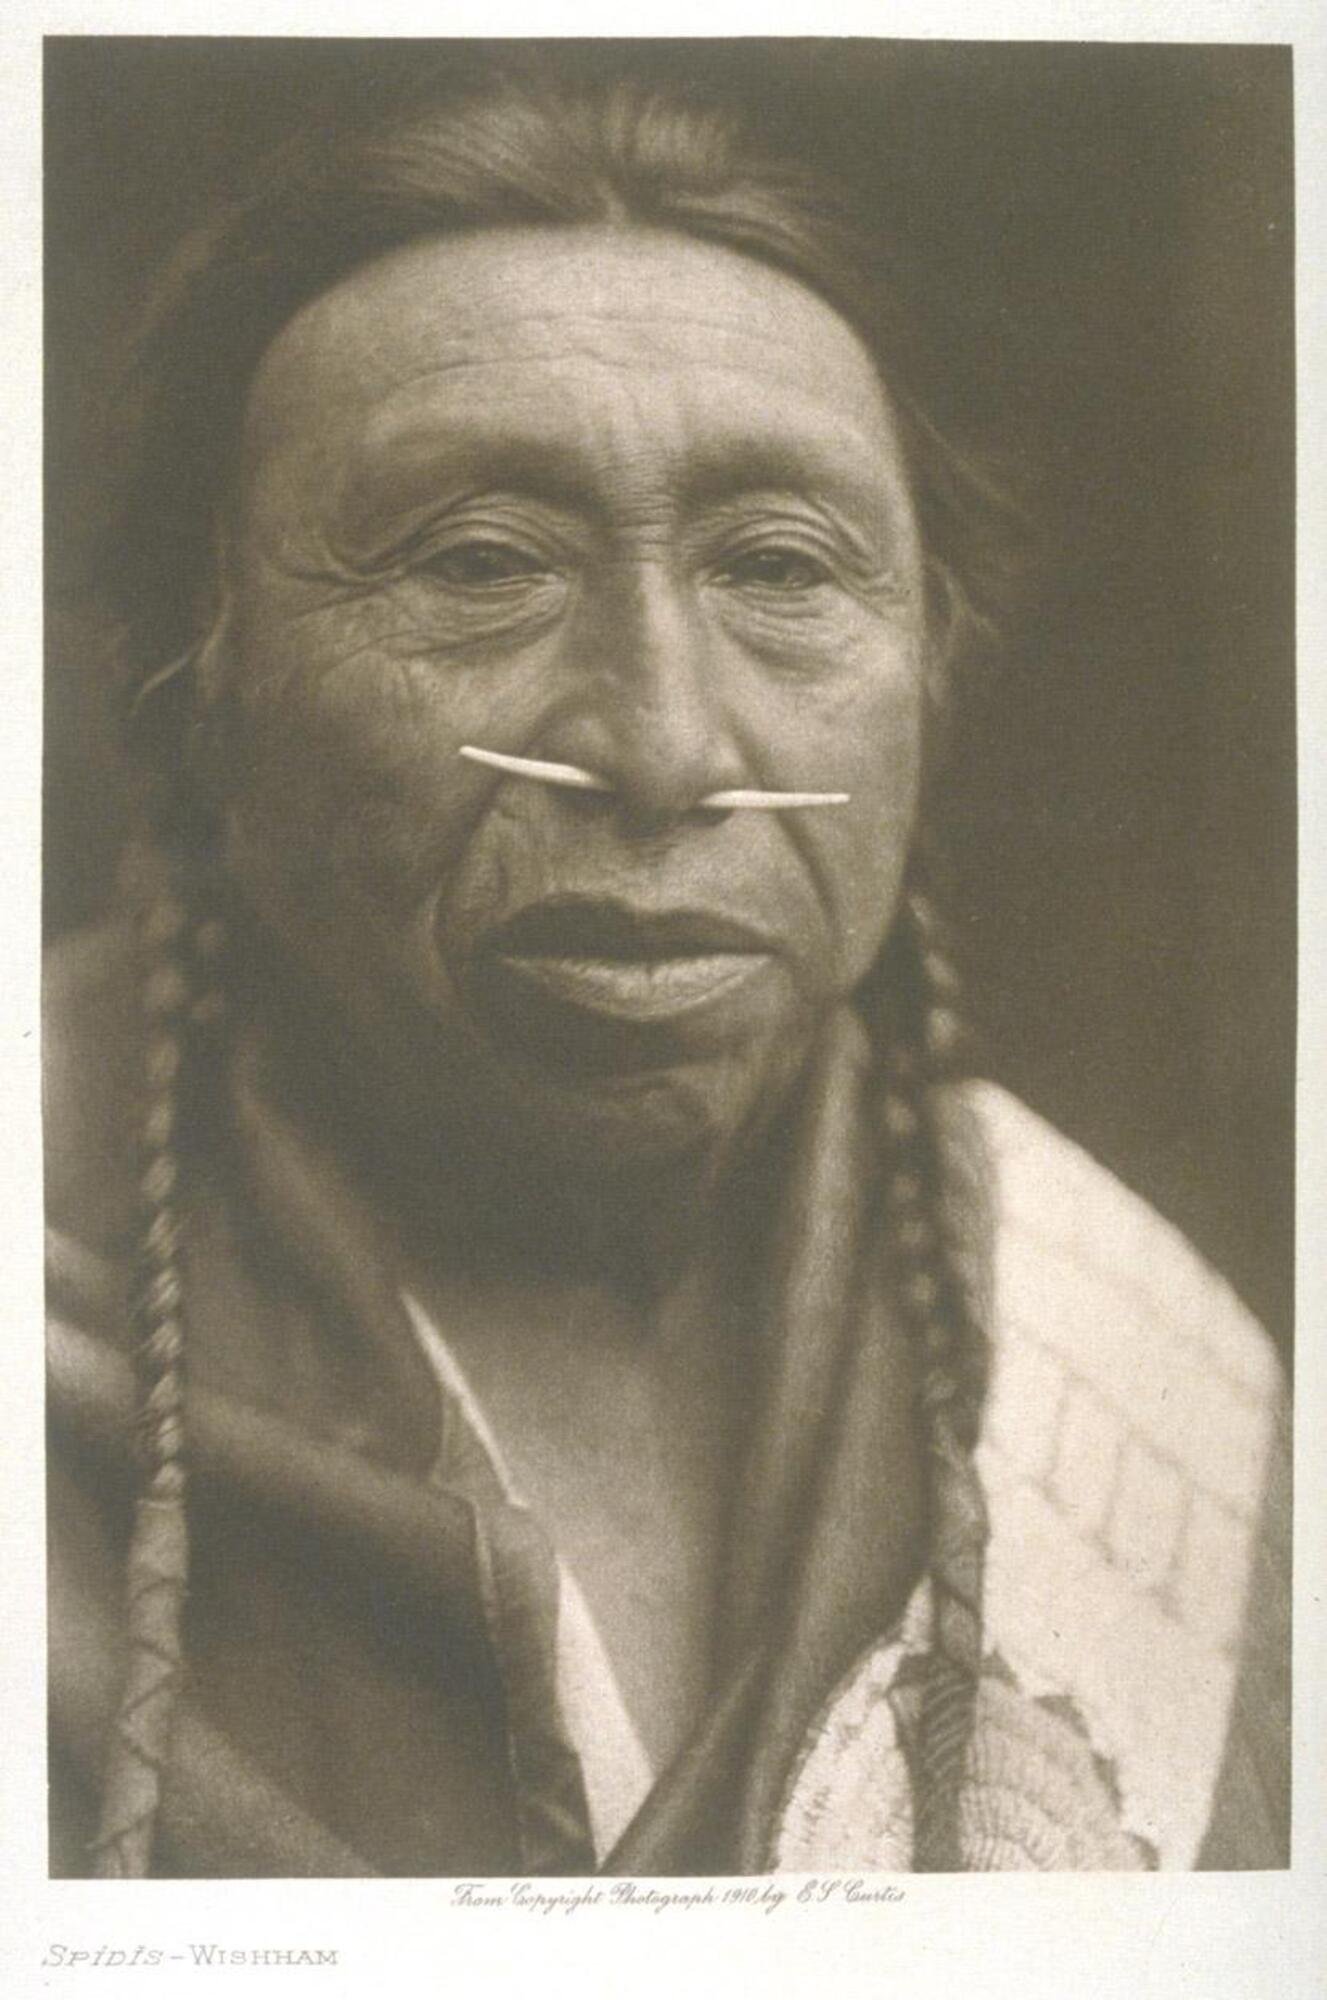 A portrait of an aging man. He wears a tusk septum piercing and two long braids, with a garment draped over his soulders. A circular embroidered design is visible near the bottom of the frame.